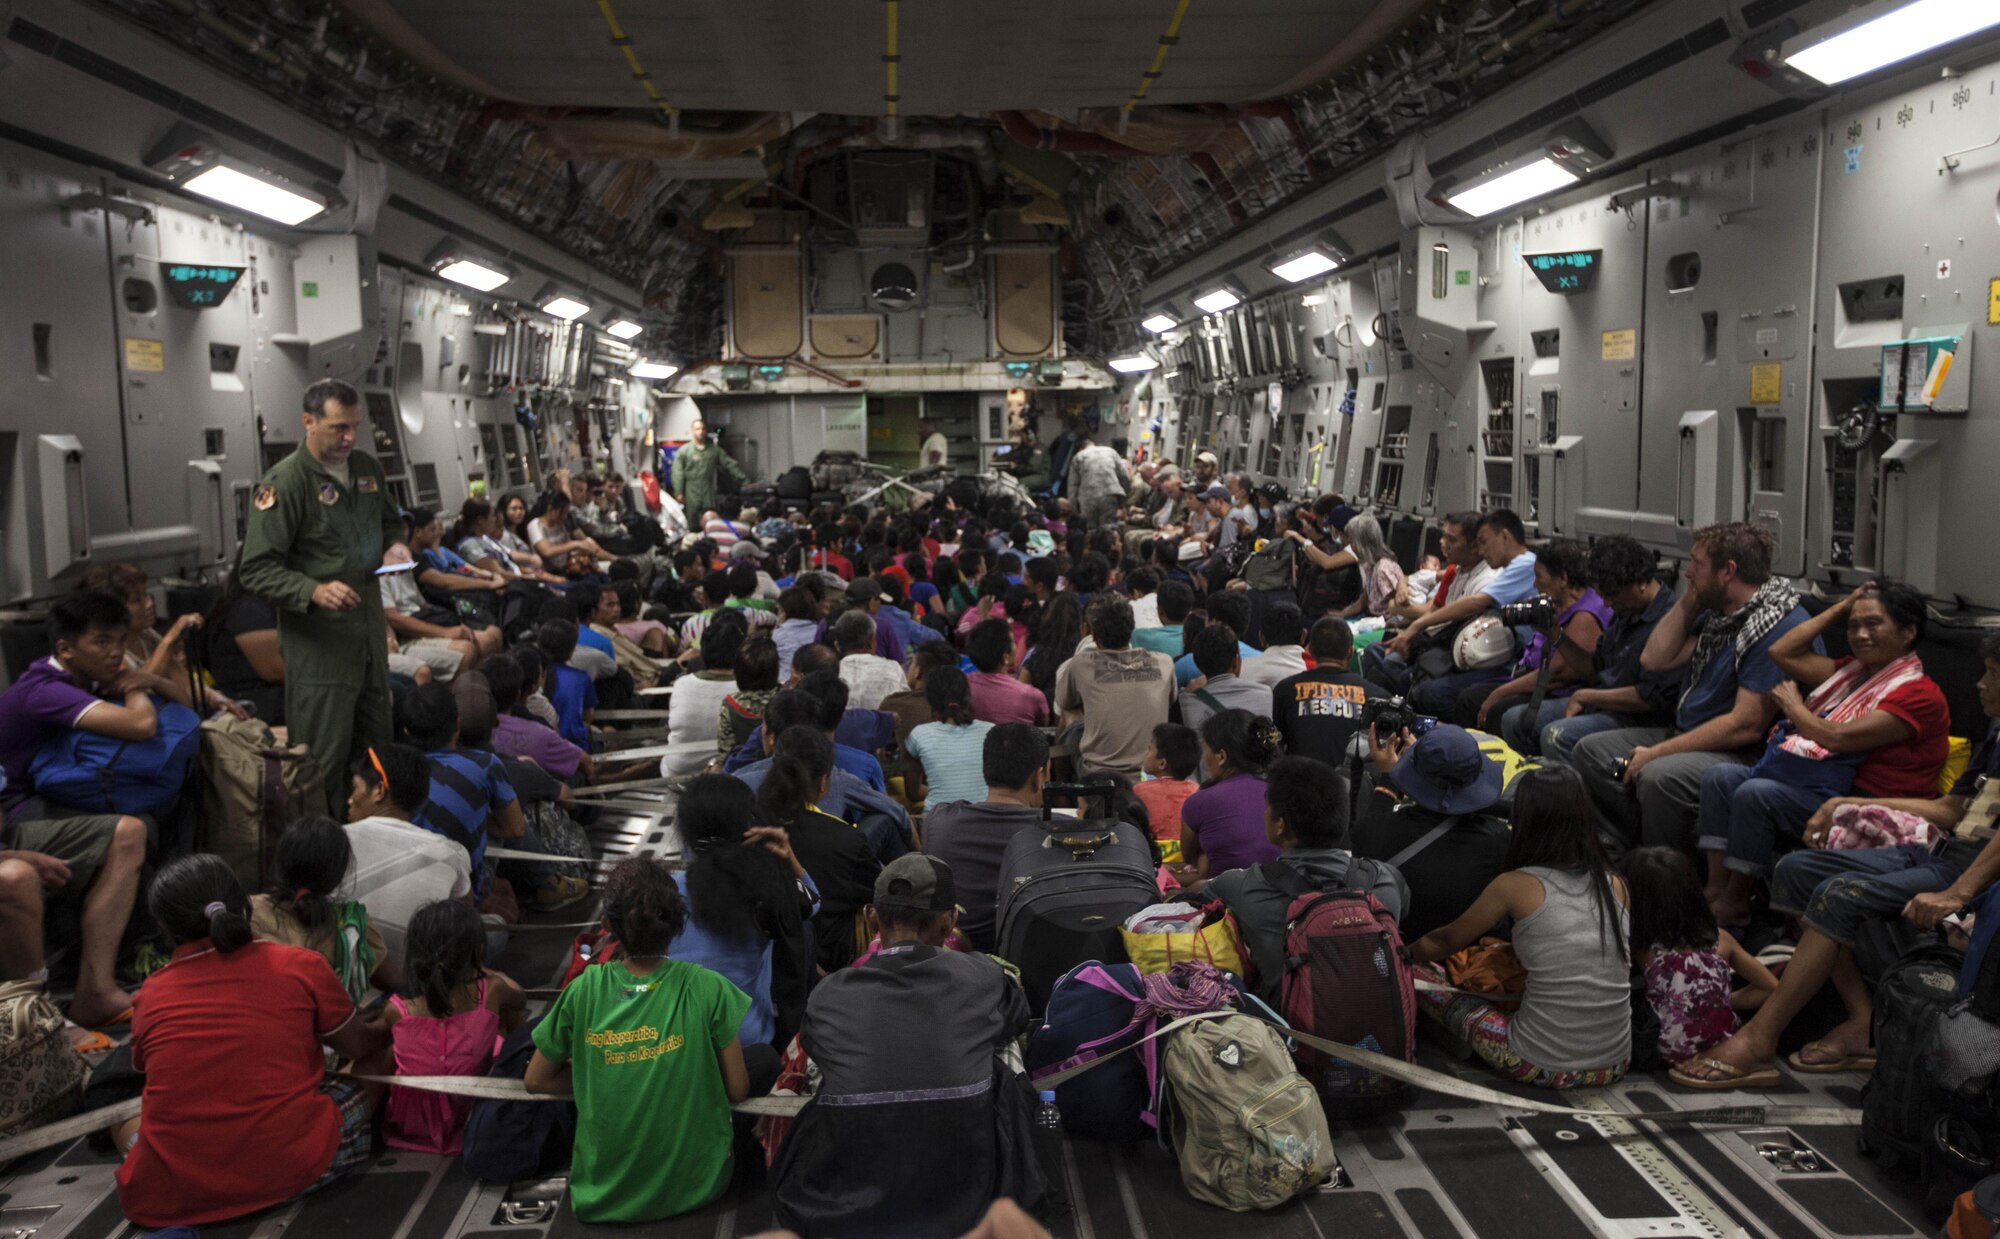 Displaced Filipino and other international personnel prepare for takeoff inside a C-17 Globemaster III with the 535th Air Lift Squadron out of Hickam Field, Honolulu, HI, for transport to Manila from Tacloban Air Field, Nov. 15. The supply drop-off and personnel loading was the first use of the C-17 during Operation Damayan, able to carry significantly more supplies and displaced persons than the C-130 Hercules aircraft currently being utilized. To date, the multi-national force has delivered more than 623,000 pounds of relief aid. The 3rd MEB is currently supporting the Armed Forces of the Philippines in providing humanitarian aid and disaster relief to areas affected by Super Typhoon Haiyan/Yolanda.